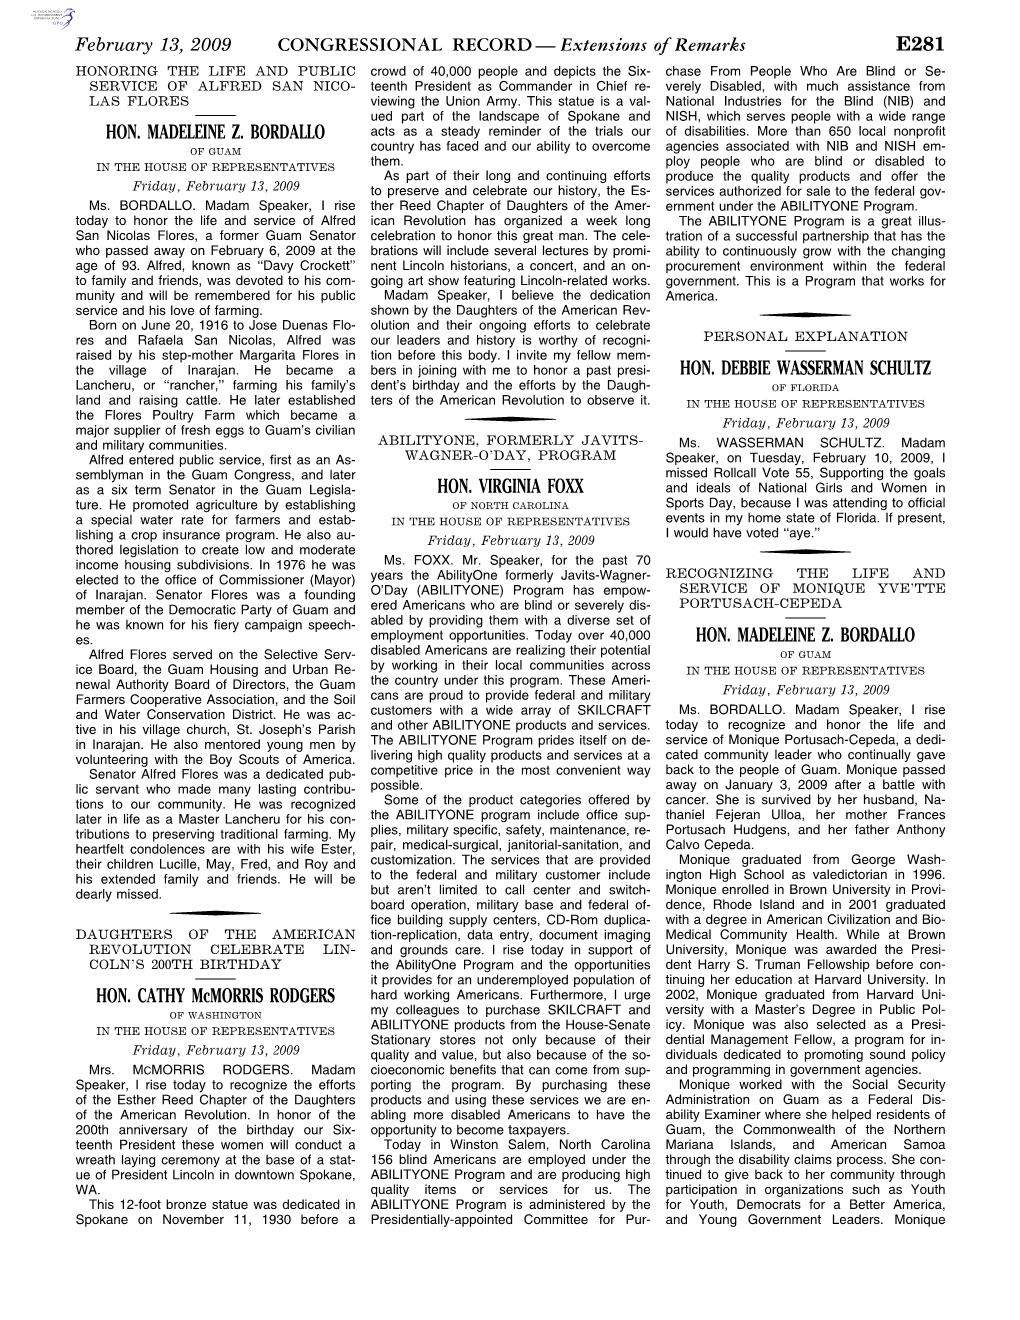 CONGRESSIONAL RECORD— Extensions of Remarks E281 HON